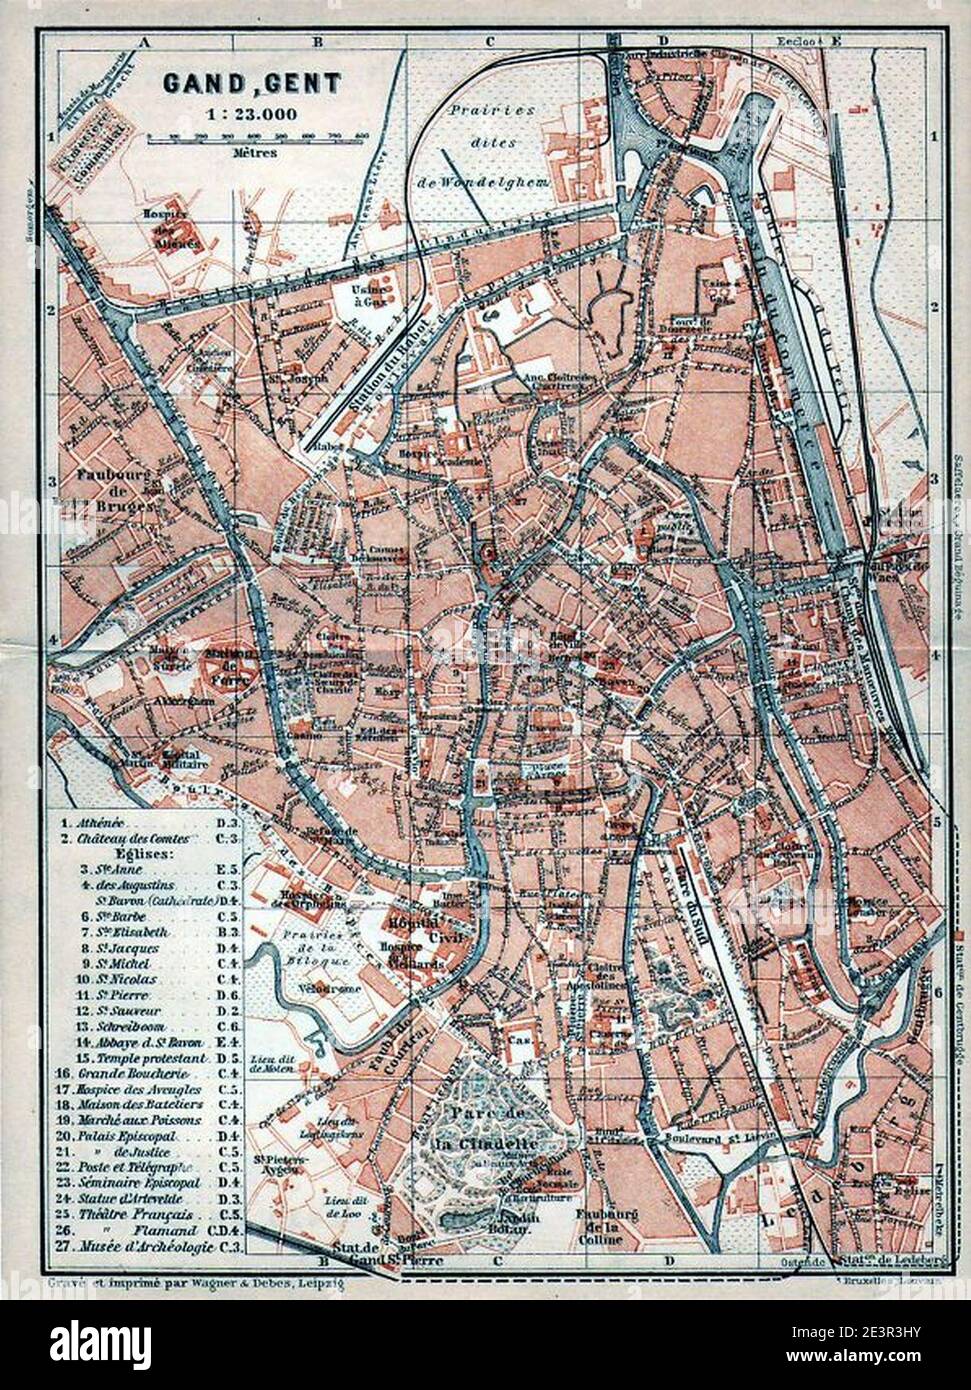 Map of Ghent by Wagner and Debes, 1904. Stock Photo